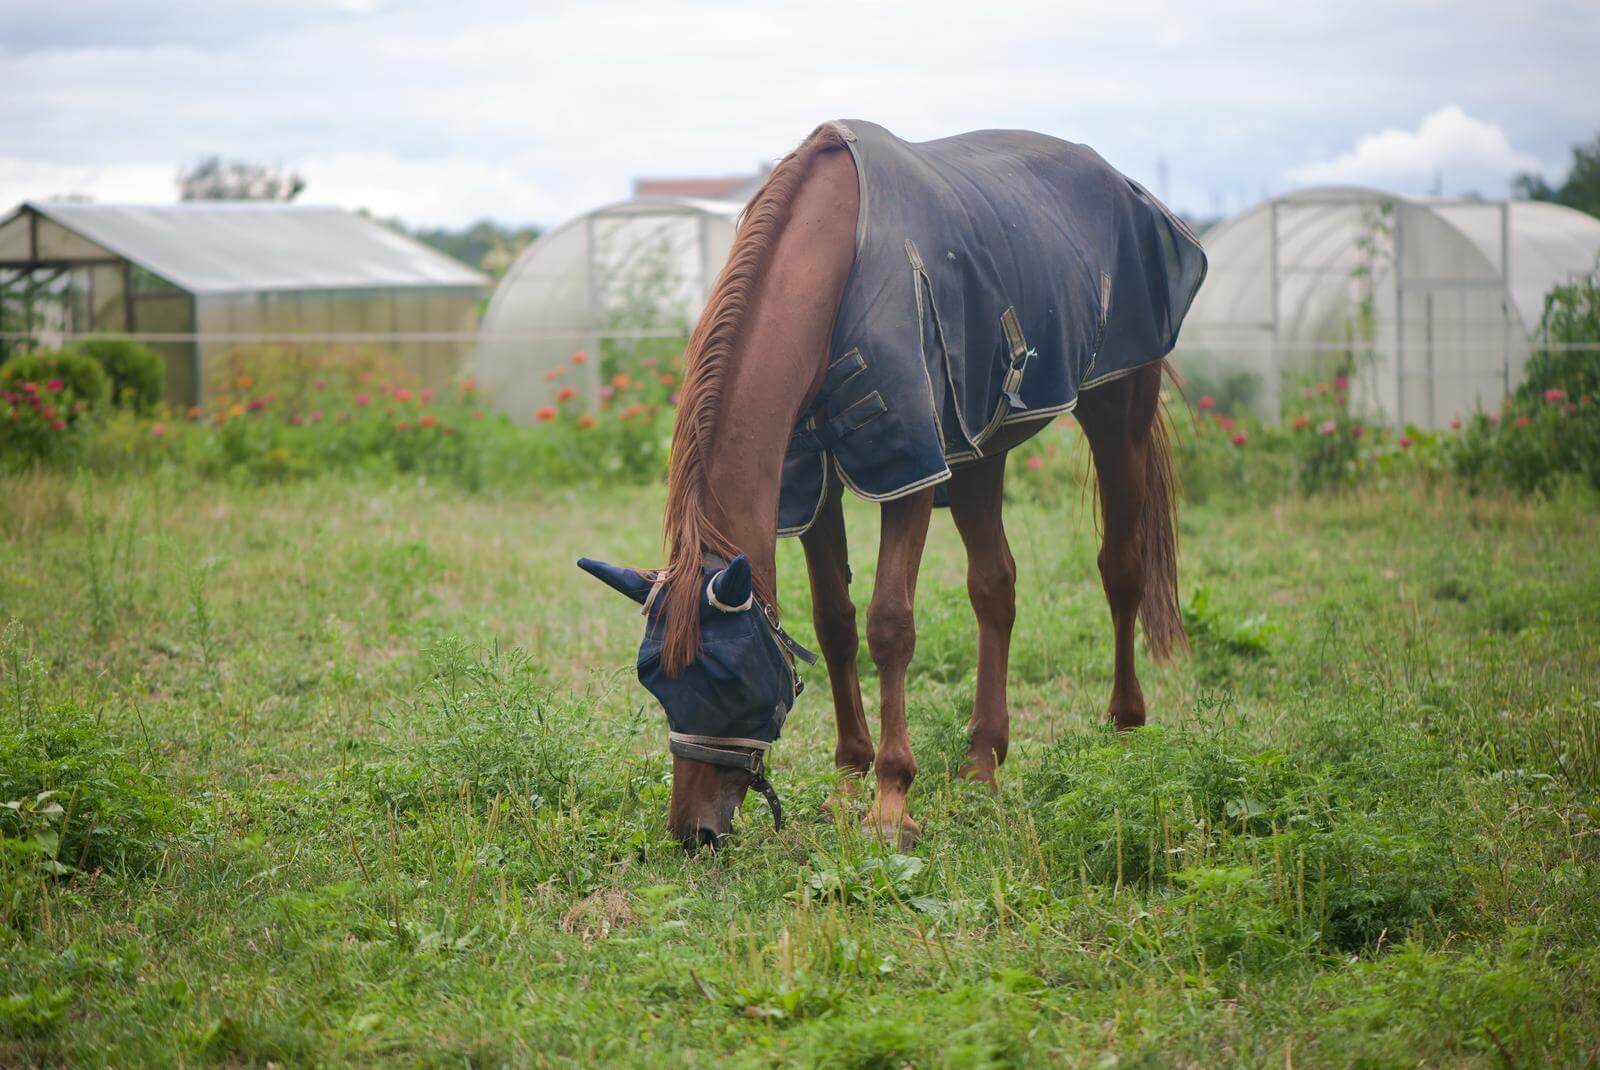 How to put fly sheet on horse. Horse eating grass with fly sheet.